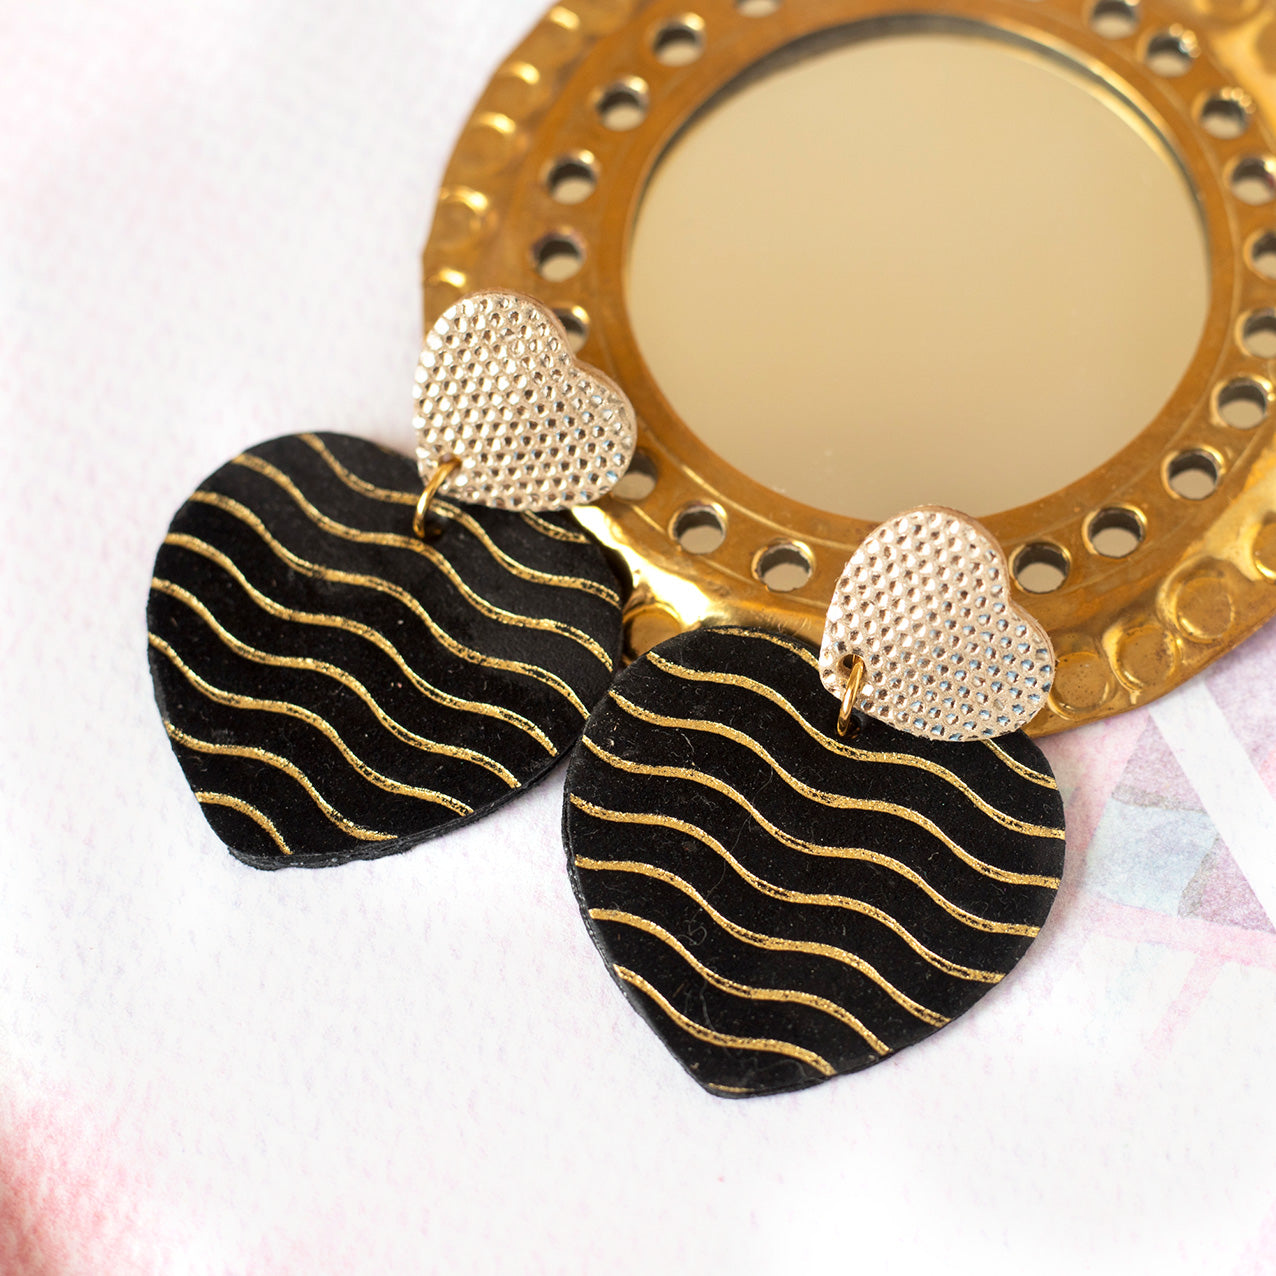 Gold Double Hearts Earrings with Polka Dots and Black